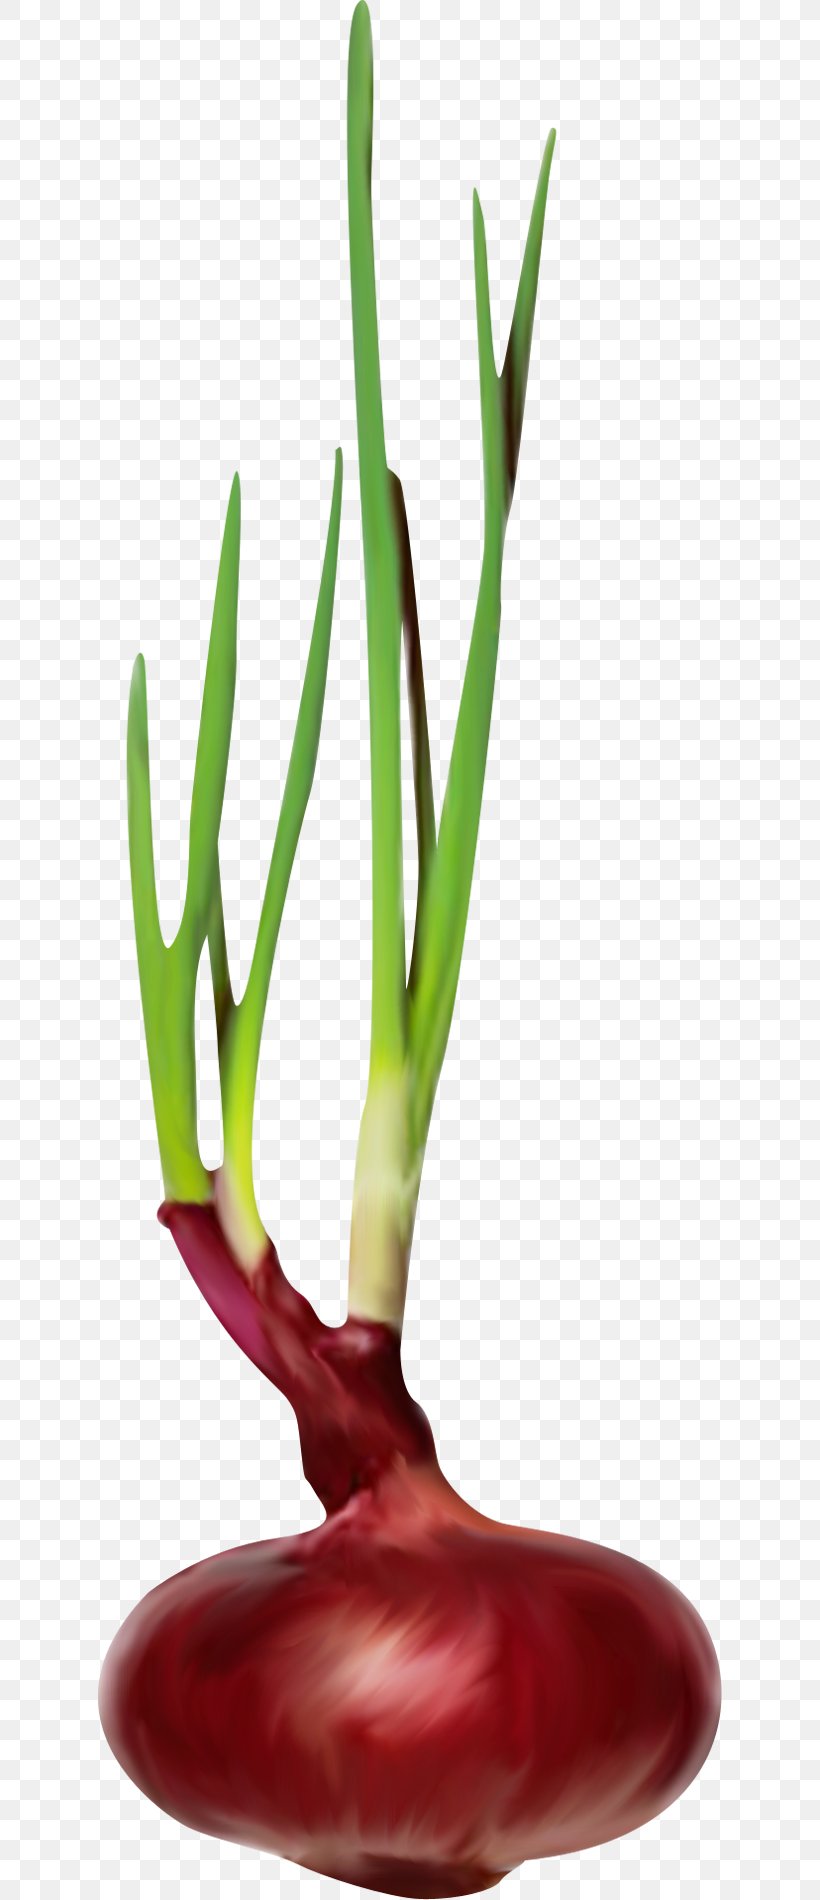 Onion Chili Pepper Scallion, PNG, 625x1900px, Onion, Allium, Bell Peppers And Chili Peppers, Cayenne Pepper, Chili Pepper Download Free